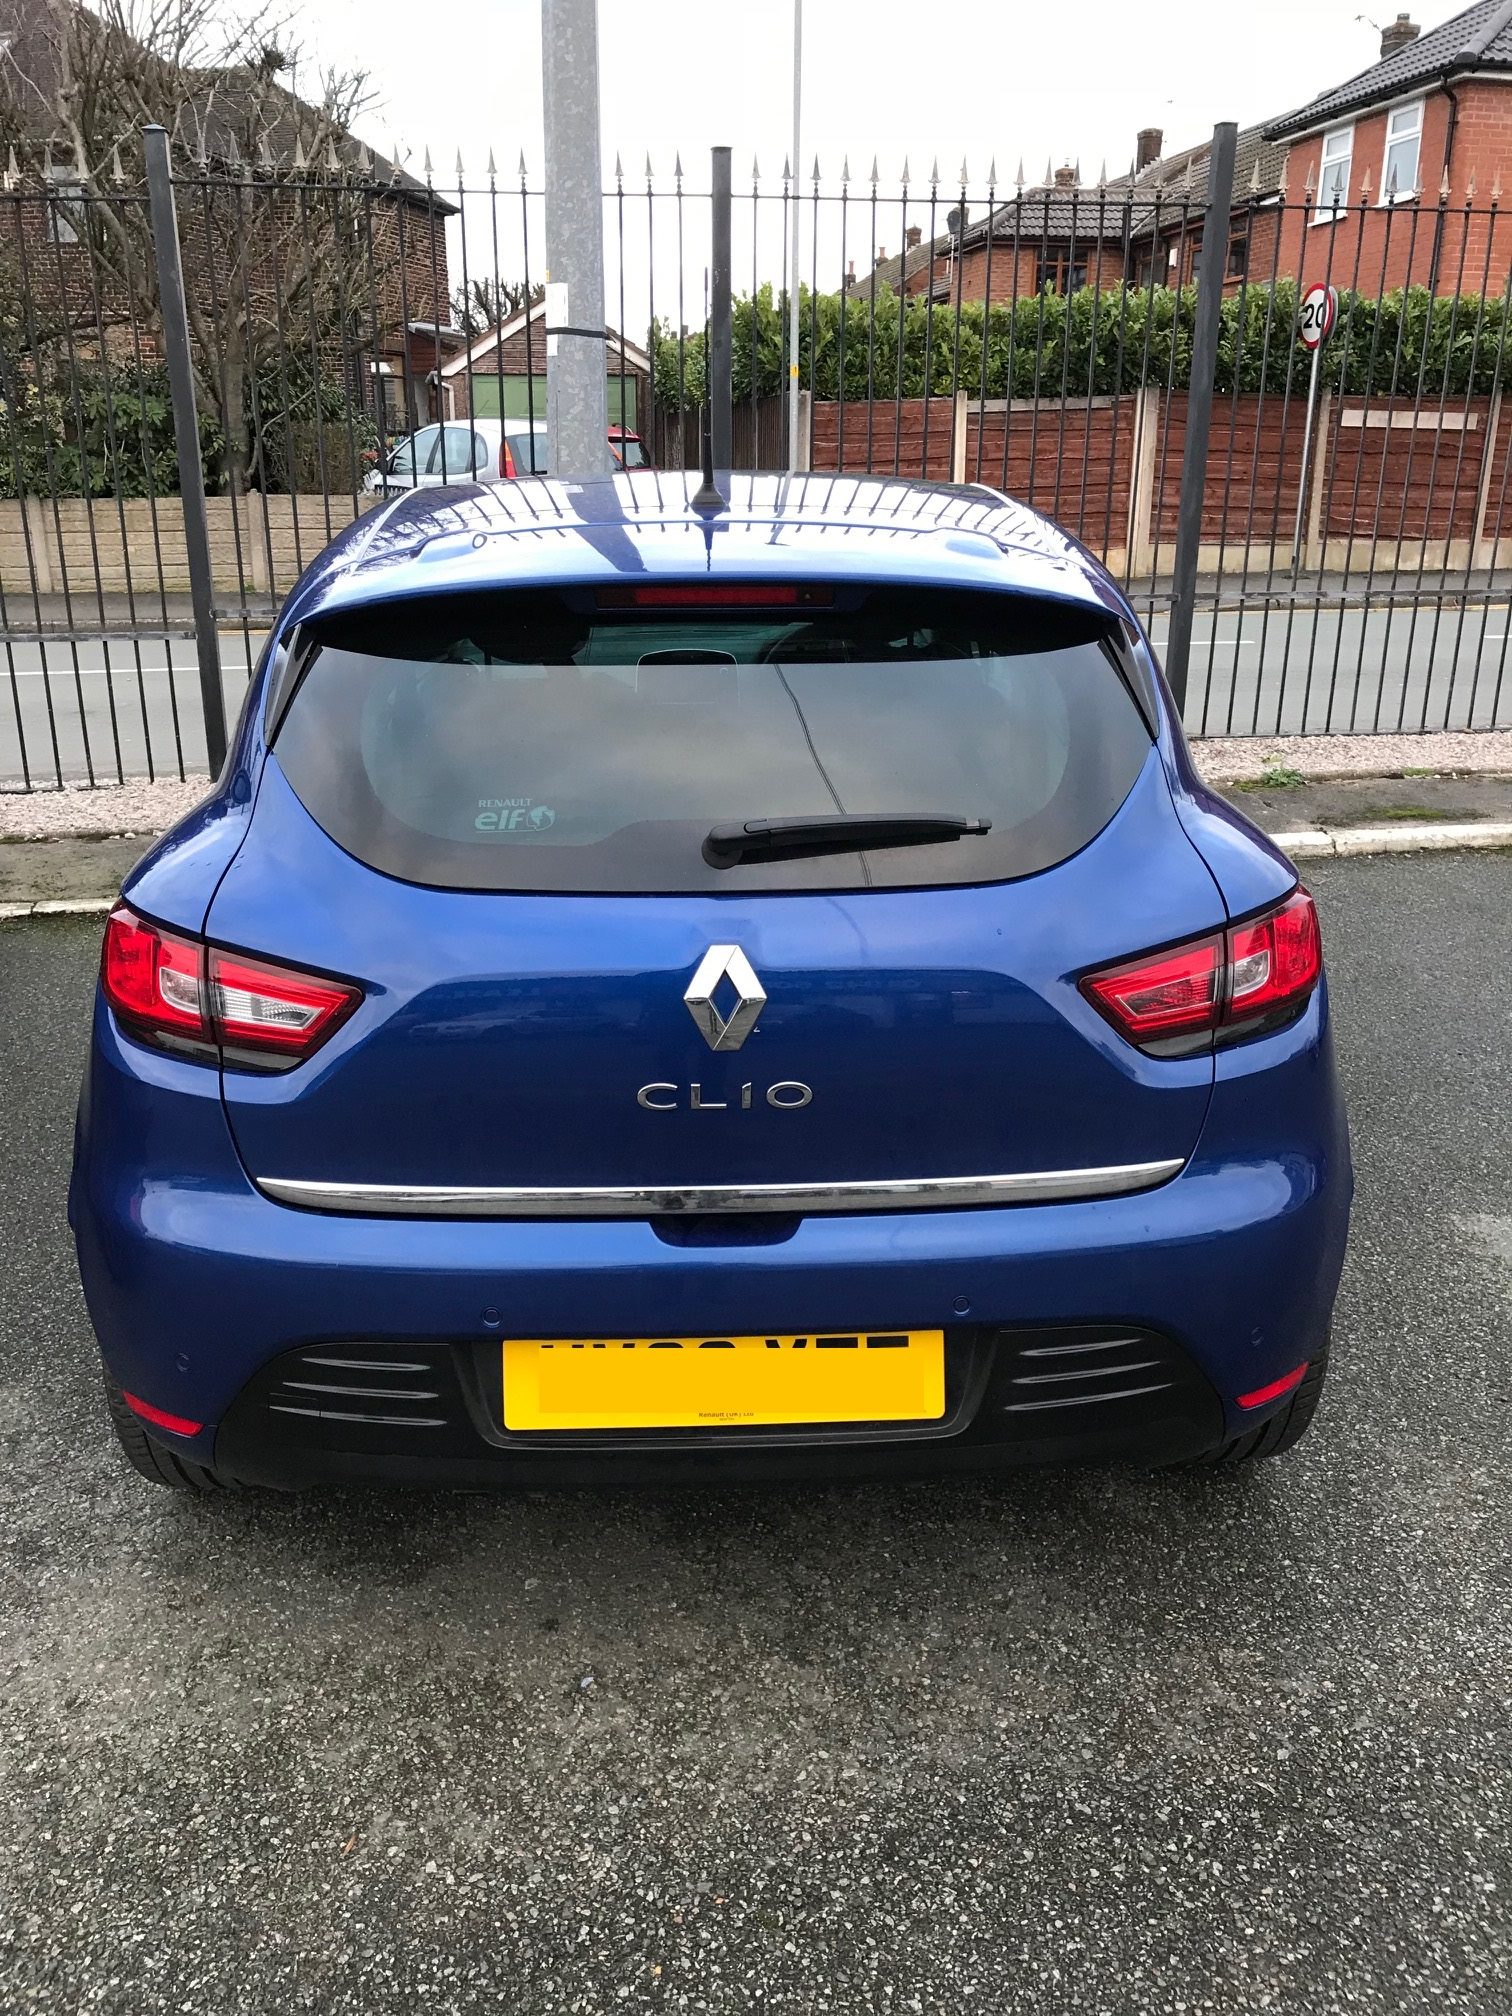 Renault CLIO HATCHBACK 0.9 TCE 90 Iconic 5dr Car Leasing